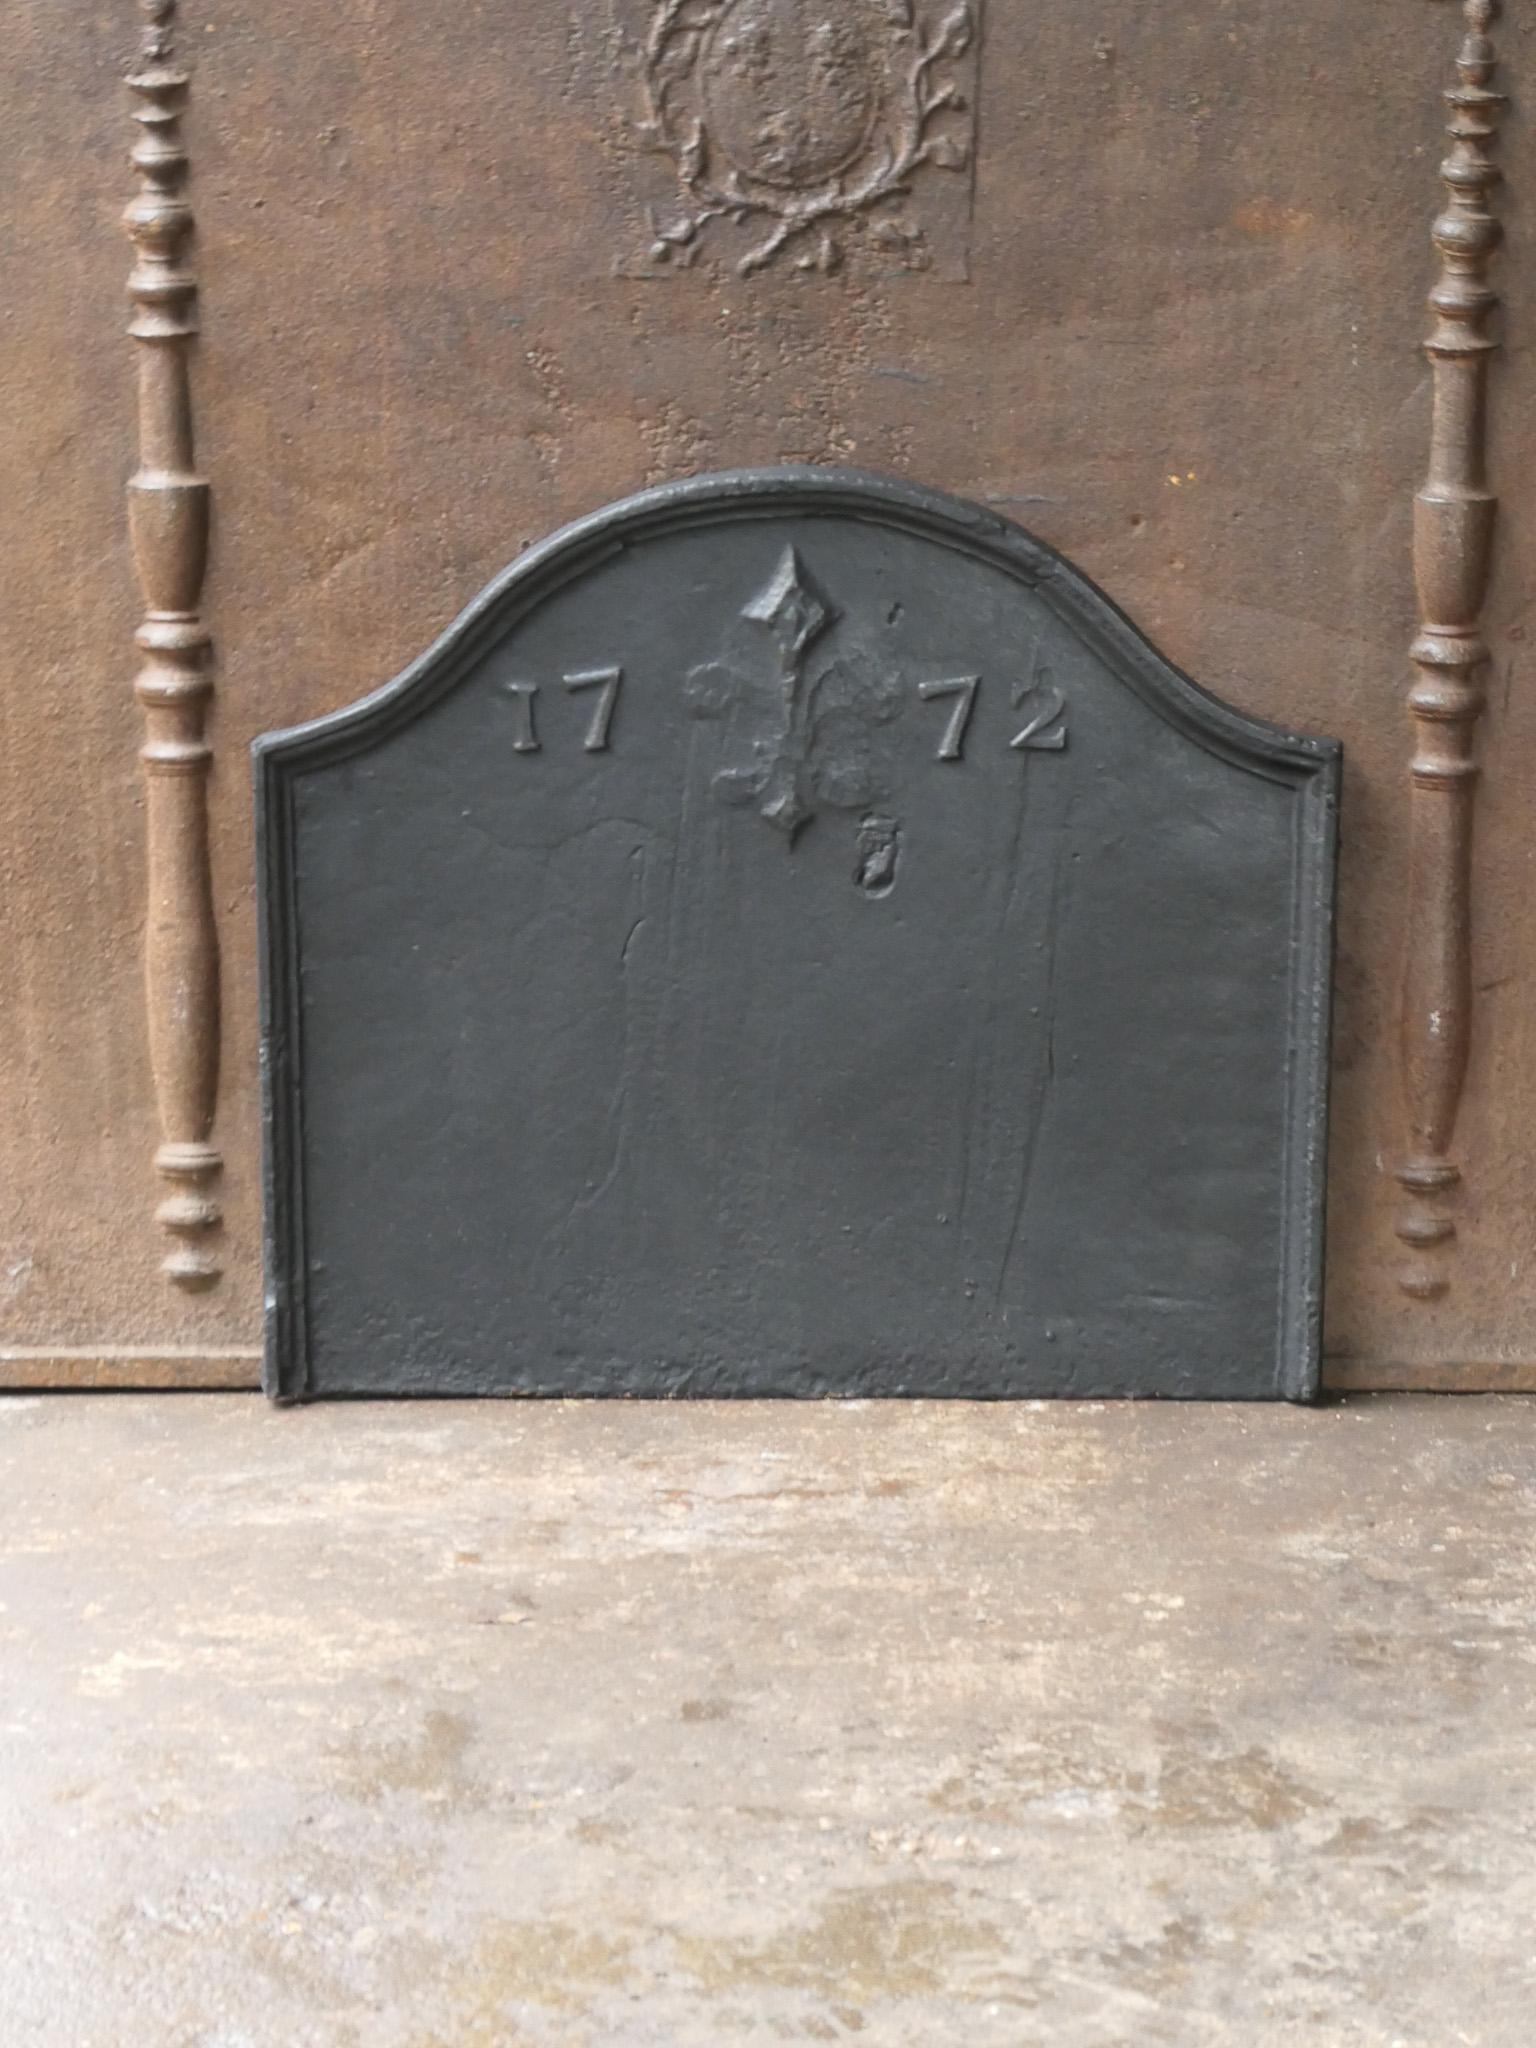 Beautiful 18th century French Louis XV fireback with Fleur de Lys (French Lily). The Fleur de Lys symbolized royalty and aristocracy throughout Europe.  During the French revolution the Fleur de Lys was partially truncated as it symbolized loyalty